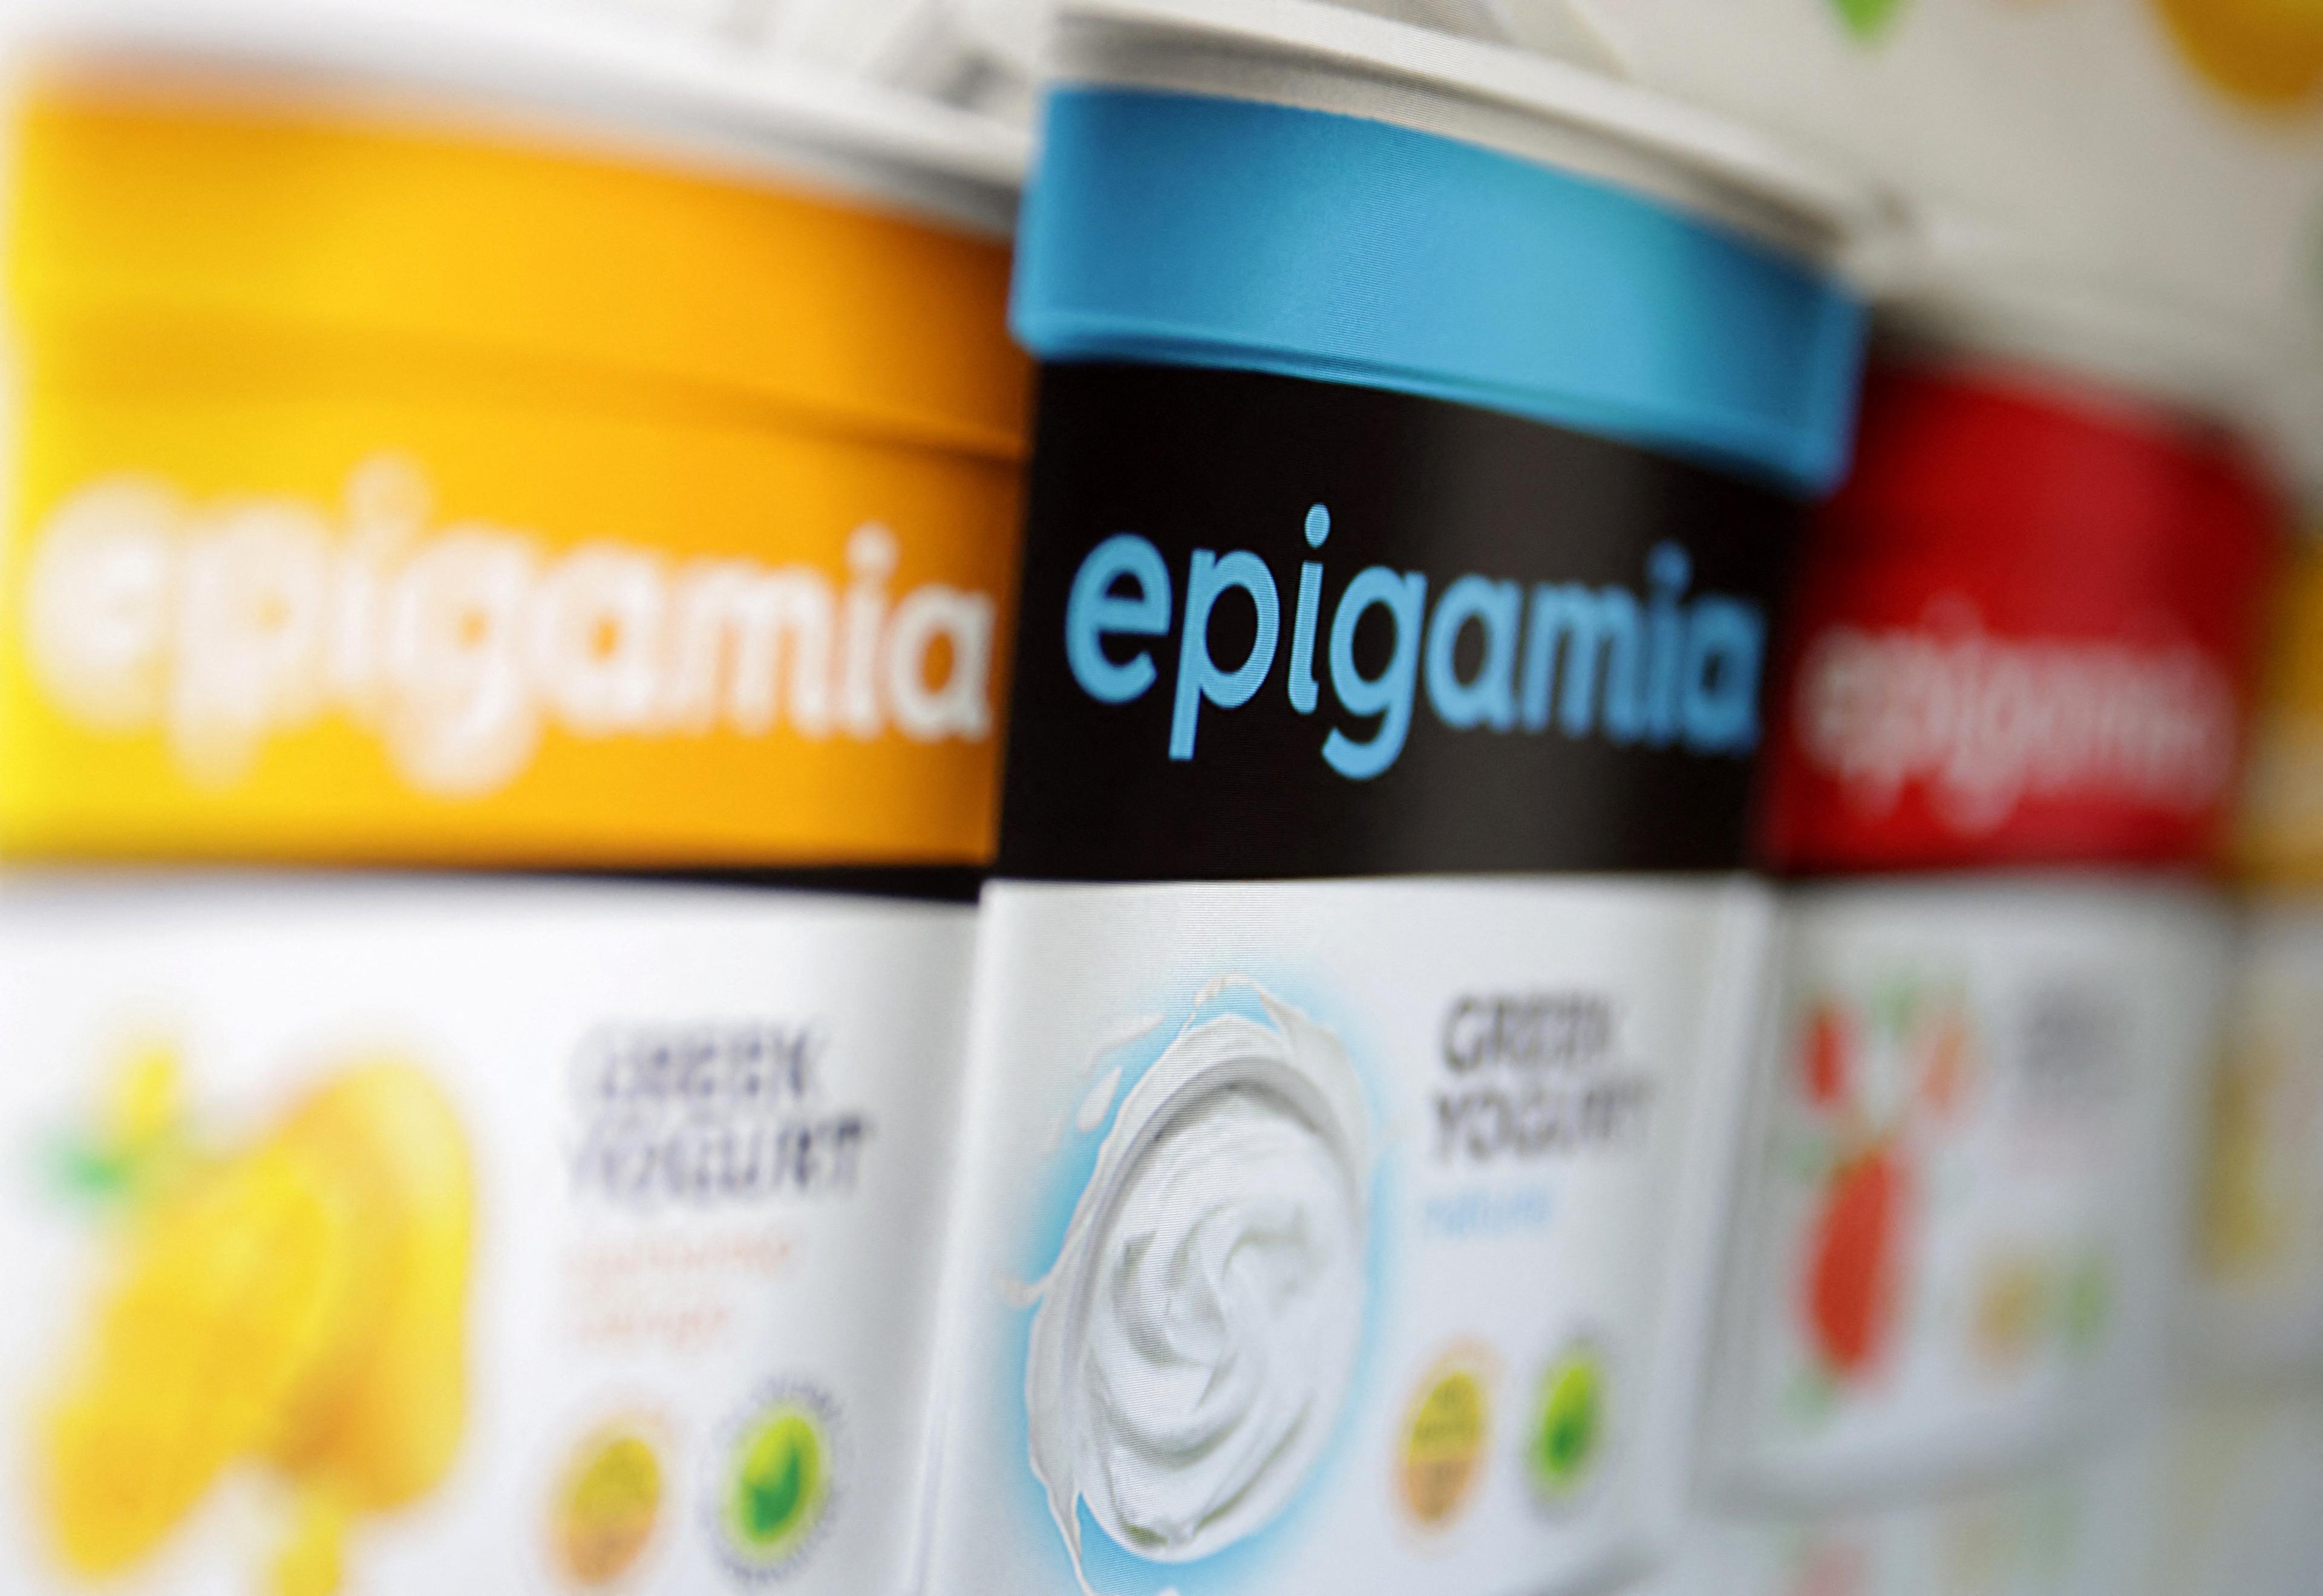 Verlinvest-backed Epigamia cancels plan to sell business, CEO says